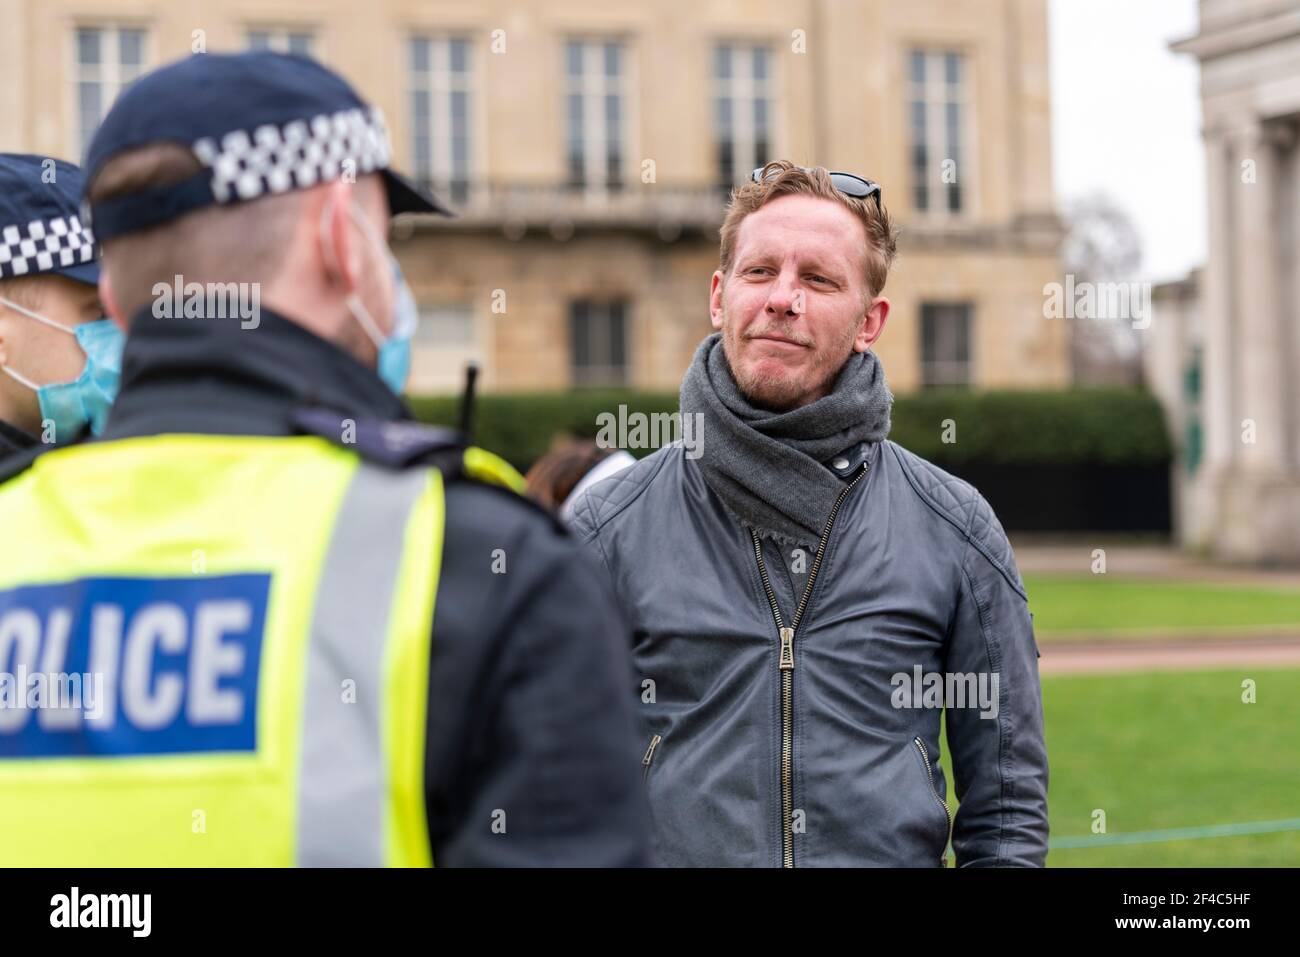 Hyde Park, London, UK. 20th Mar, 2021. Actor and activist Laurence Fox has been spoken to by police as people have begun to gather in Hyde Park for an anti-lockdown, anti policing bill protest. The actor starred in TV productions such as ITV's Lewis and has started the Reclaim political party. Fox is planning to stand for election for Mayor of London in May 2021 Stock Photo